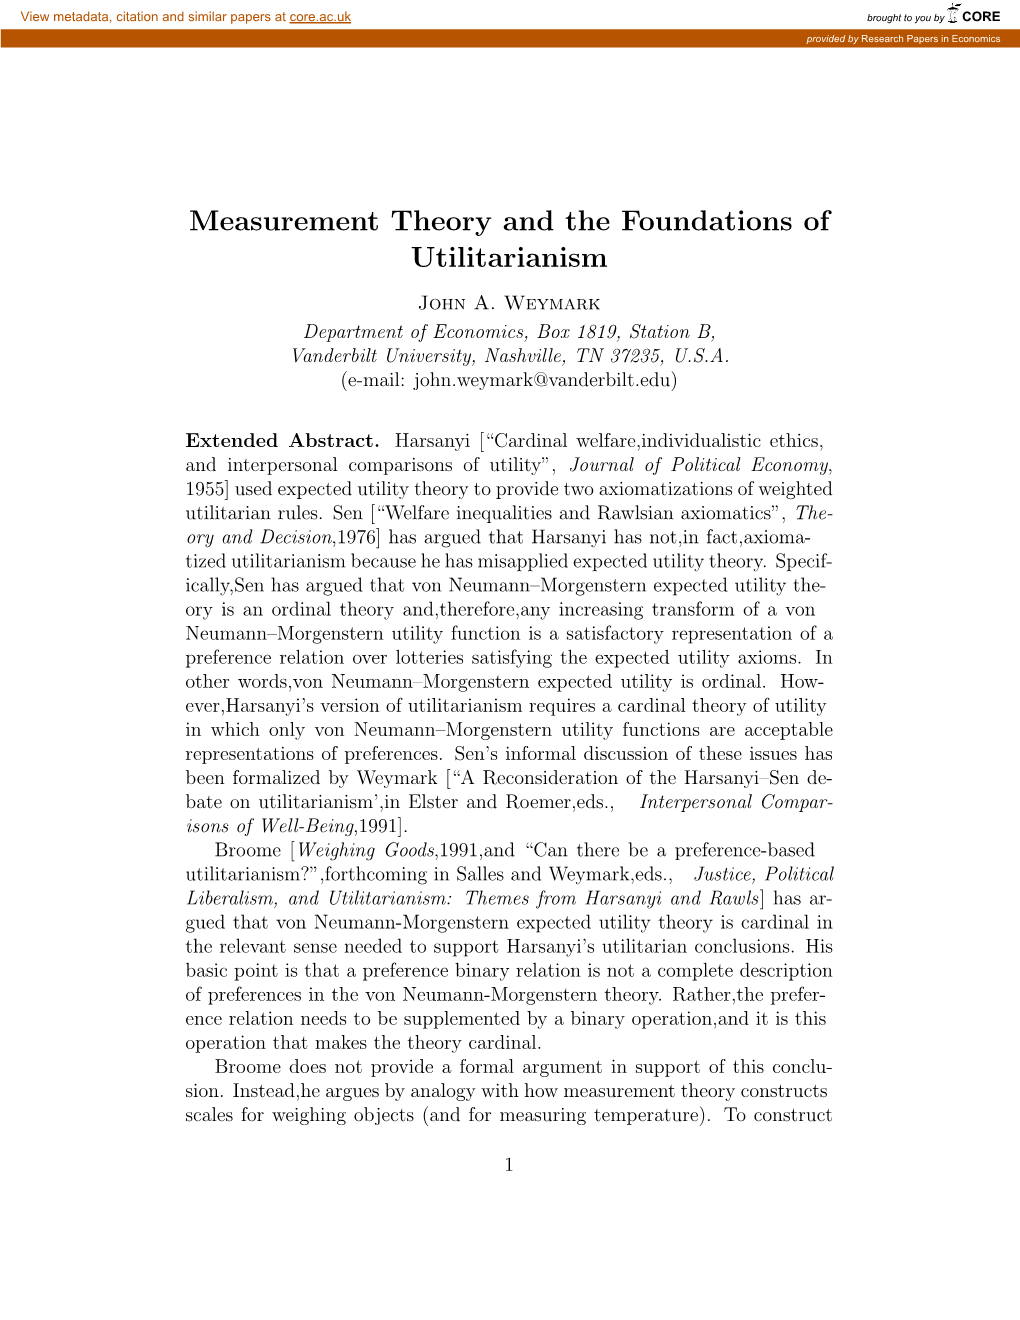 Measurement Theory and the Foundations of Utilitarianism John A